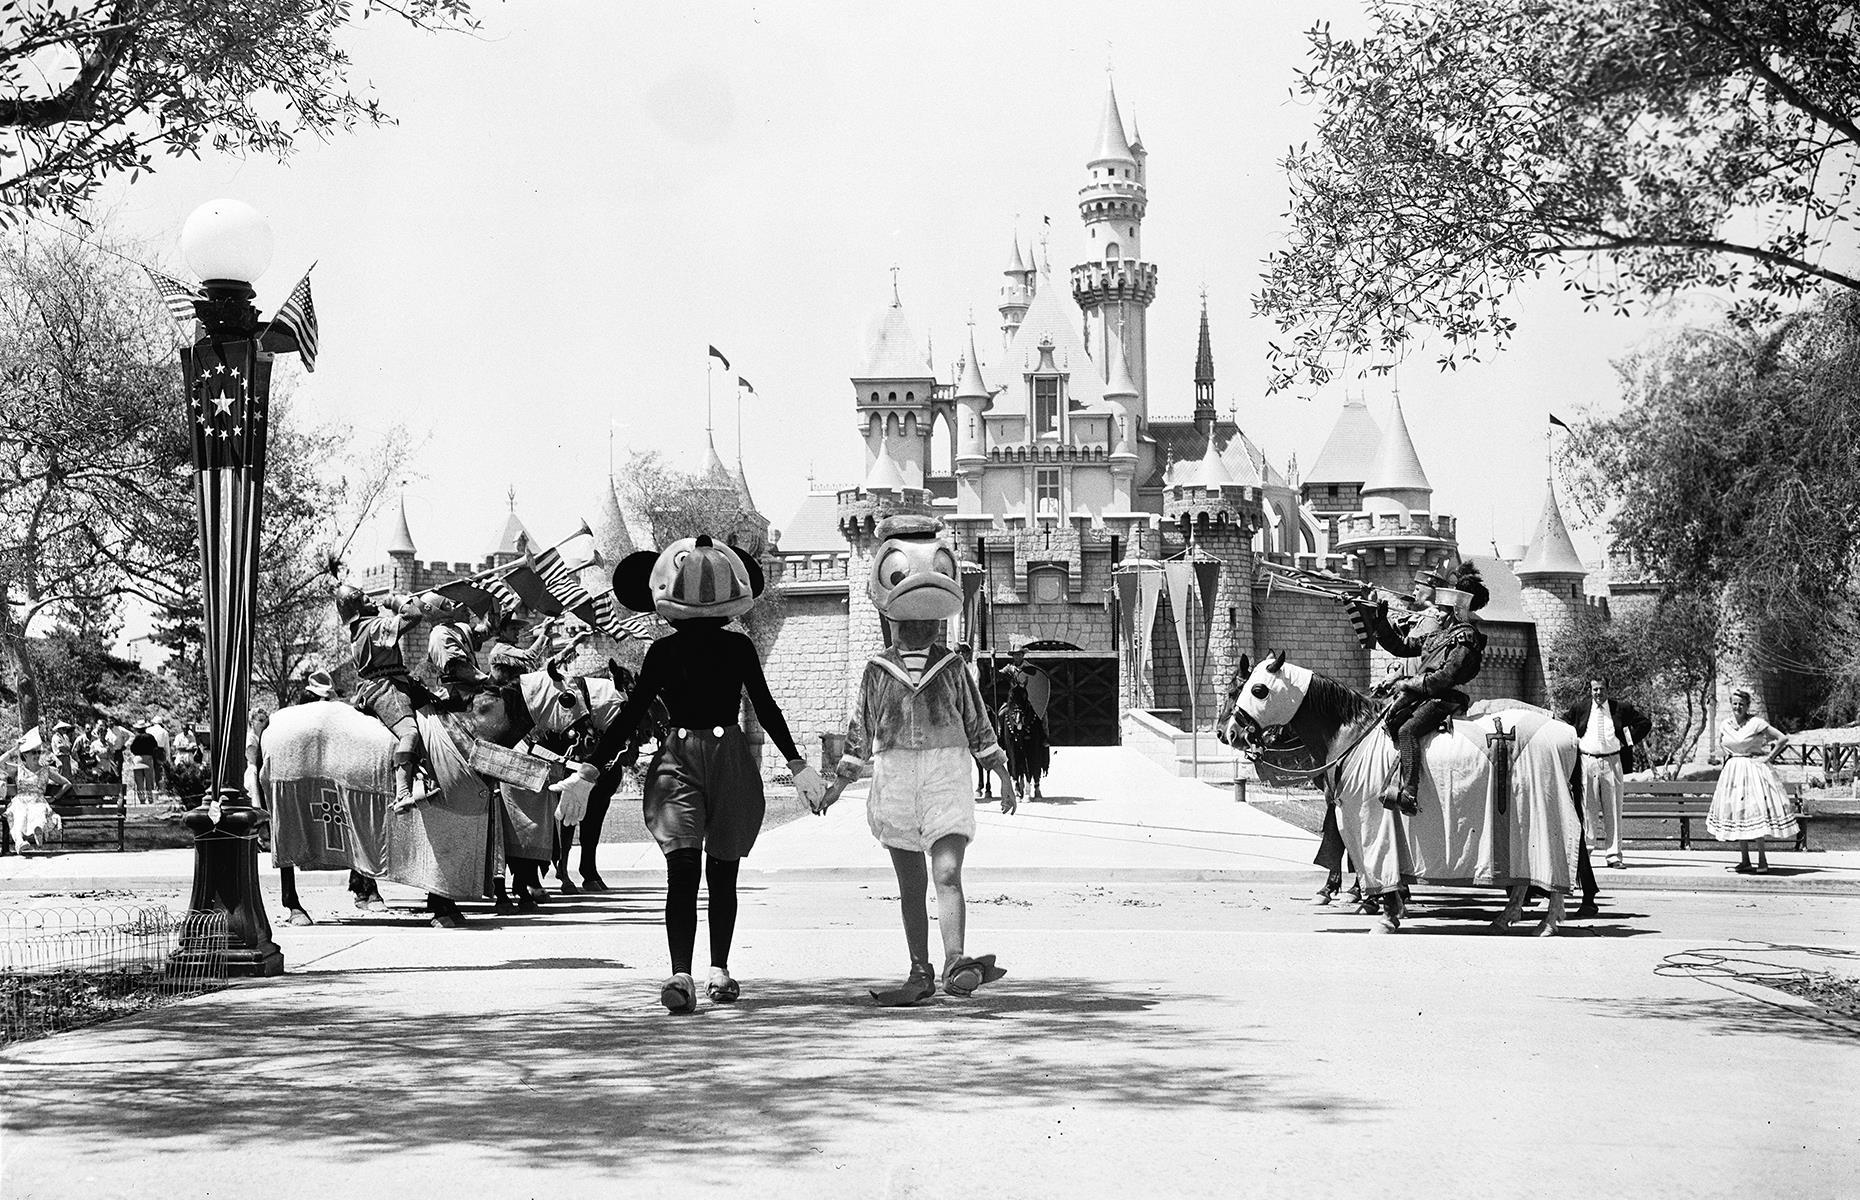 <p>From Florida to Paris, Disney's larger-than-life theme parks attract millions of visitors each year. And, with the oldest park dating back to the 1950s, these whimsical worlds have changed considerably over the decades. To celebrate Florida's Walt Disney World having recently celebrated its 50th anniversary, we take a look at Disney through the ages with 46 nostalgic photos.</p>